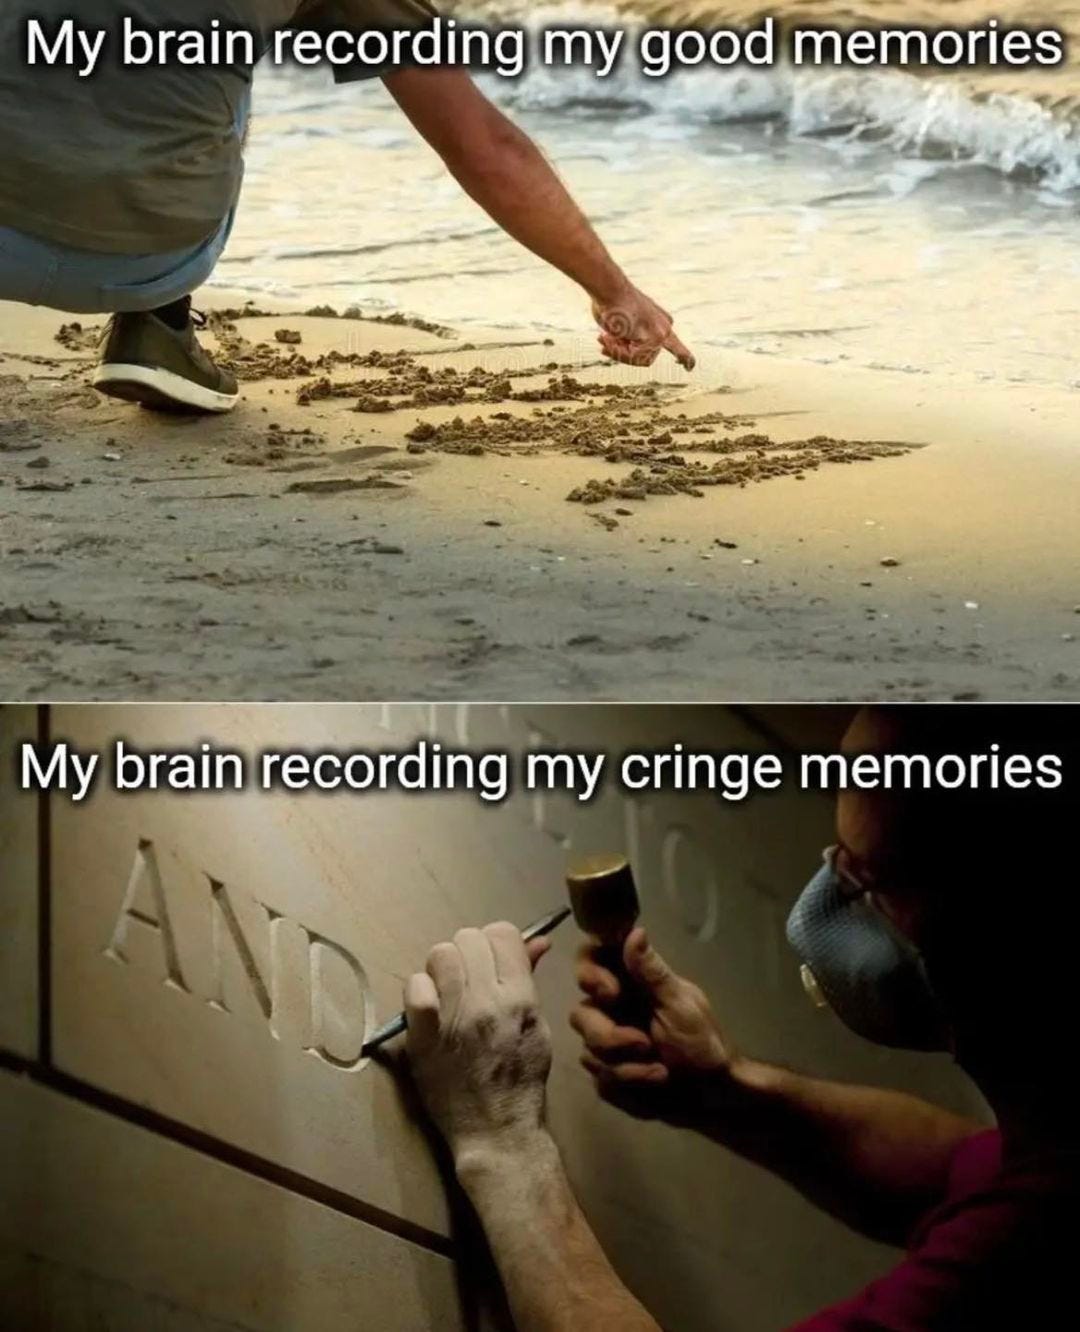 May be an image of 2 people and text that says 'My brain recording my good memories My brain recording my cringe memories'